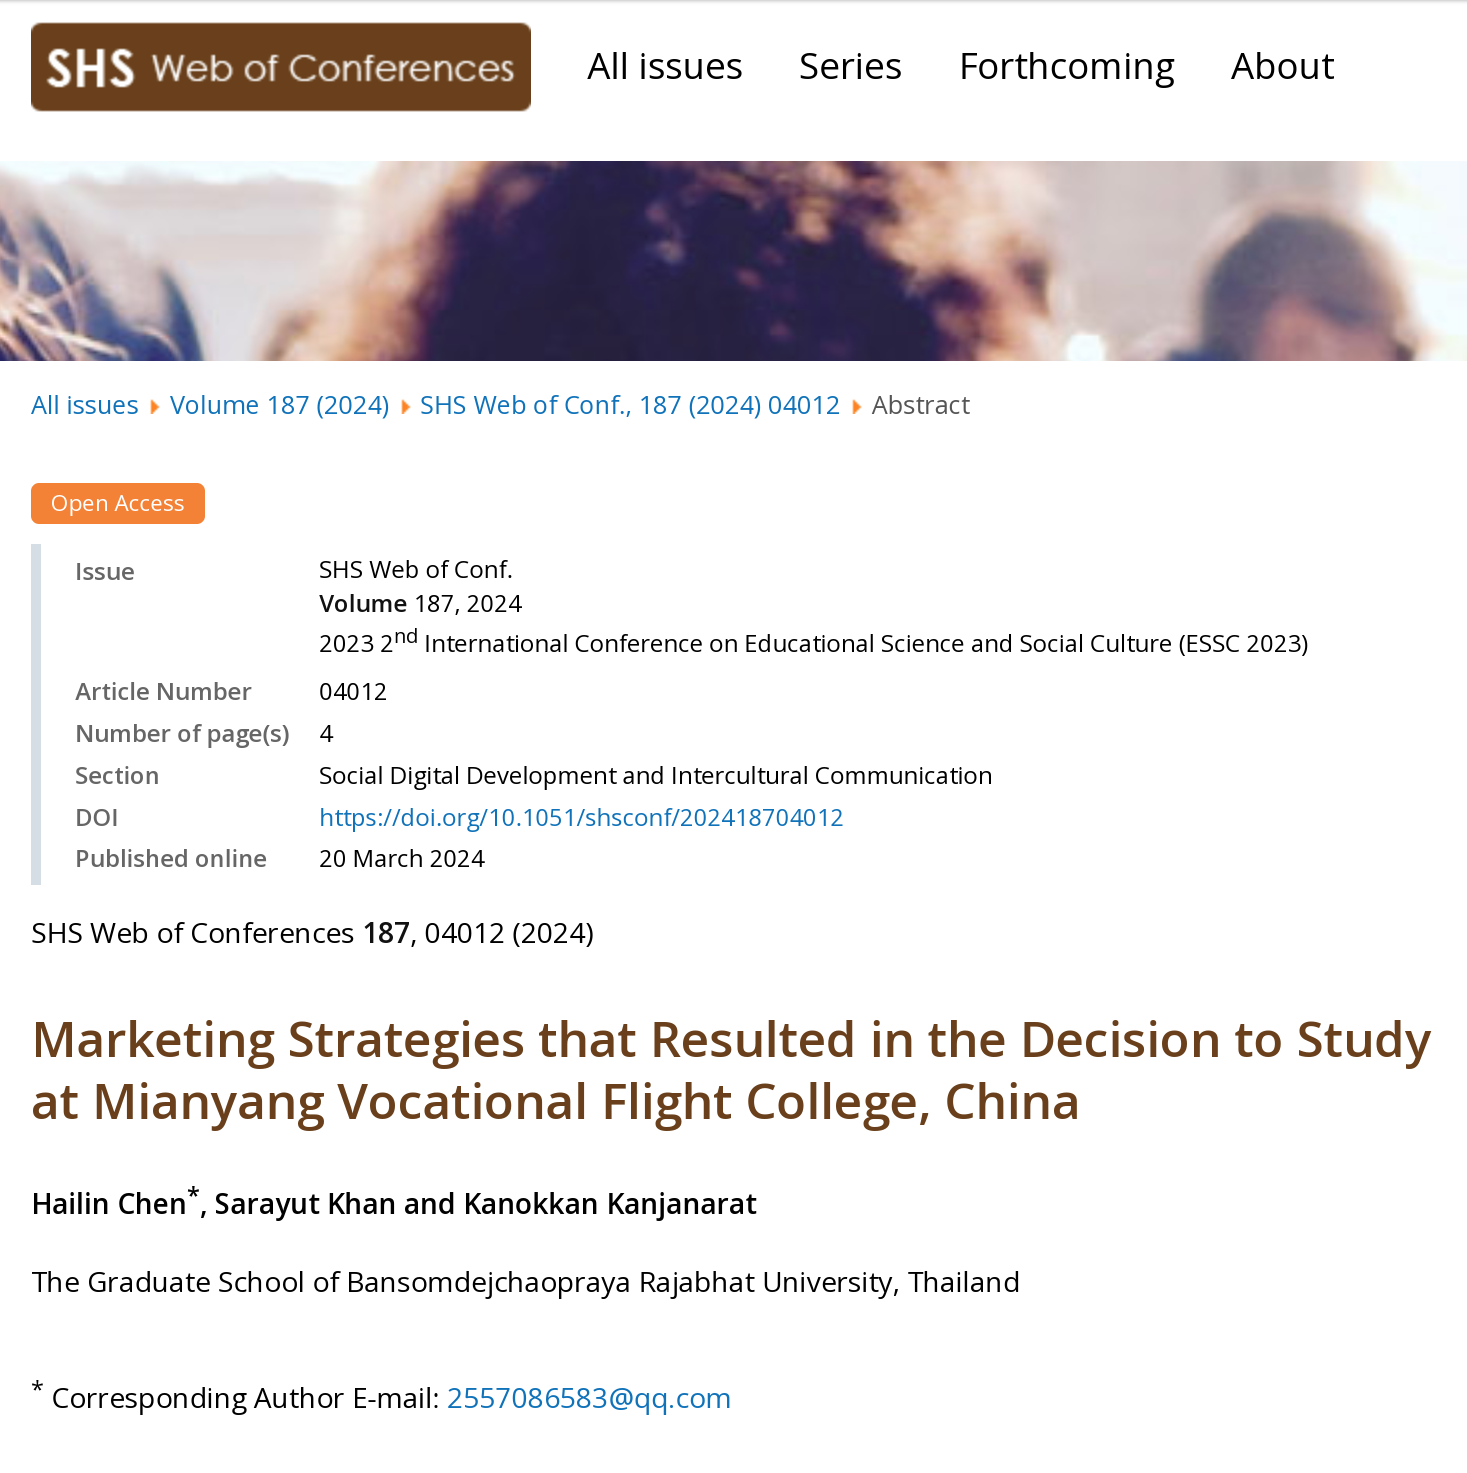 Marketing Strategies that Resulted in the Decision to Study at Mianyang Vocational Flight College, China